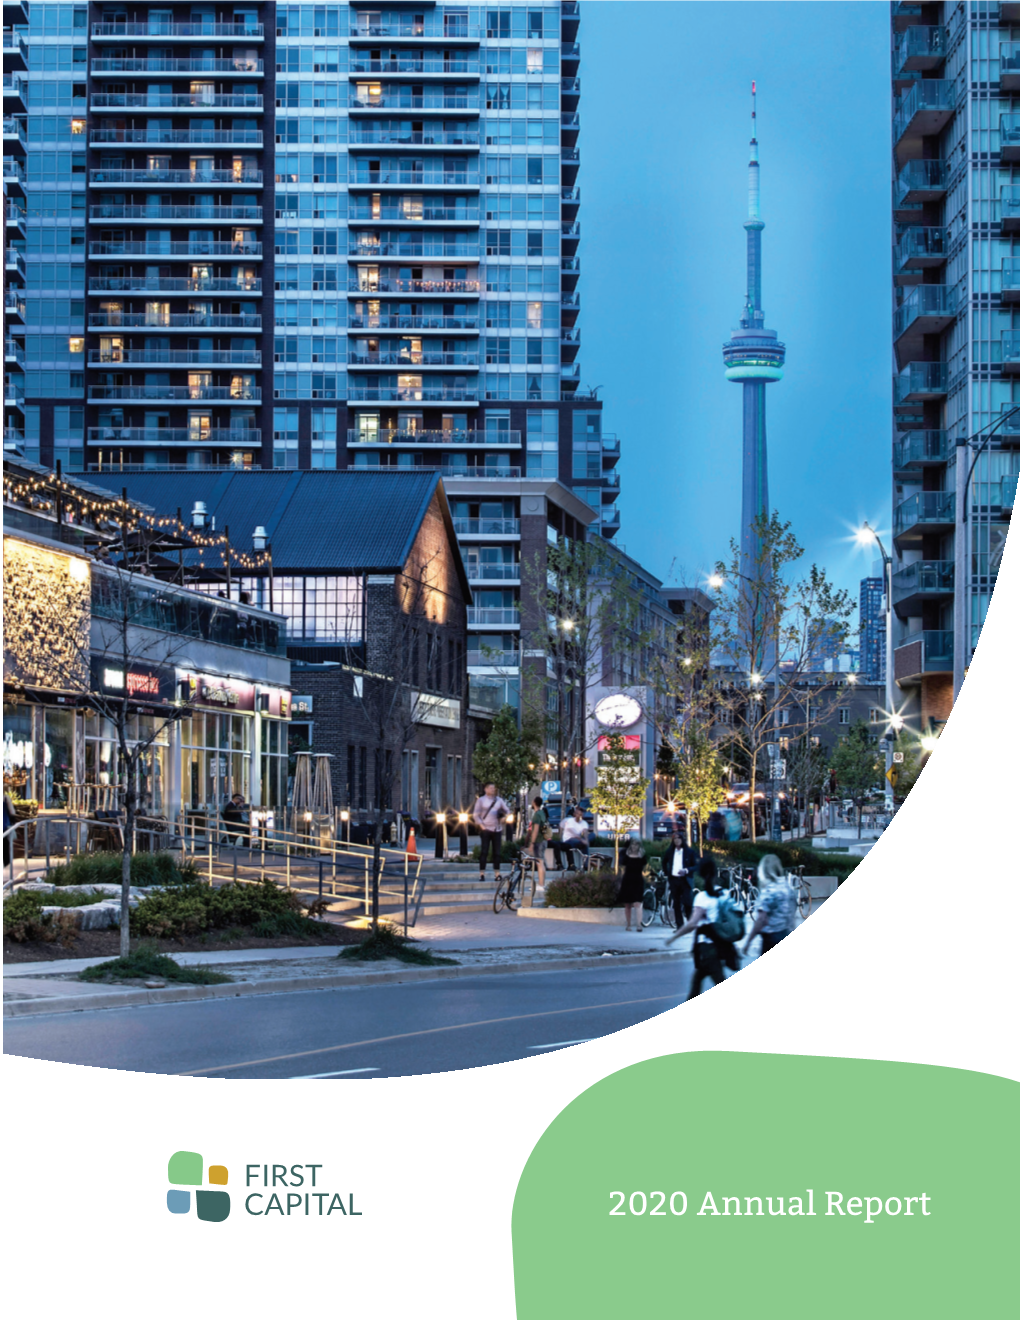 ANNUAL REPORT 2020 Supporting Our Tenants First Capital Recognizes That Small Businesses Play an Important Role in the Neighbourhoods Where It Operates